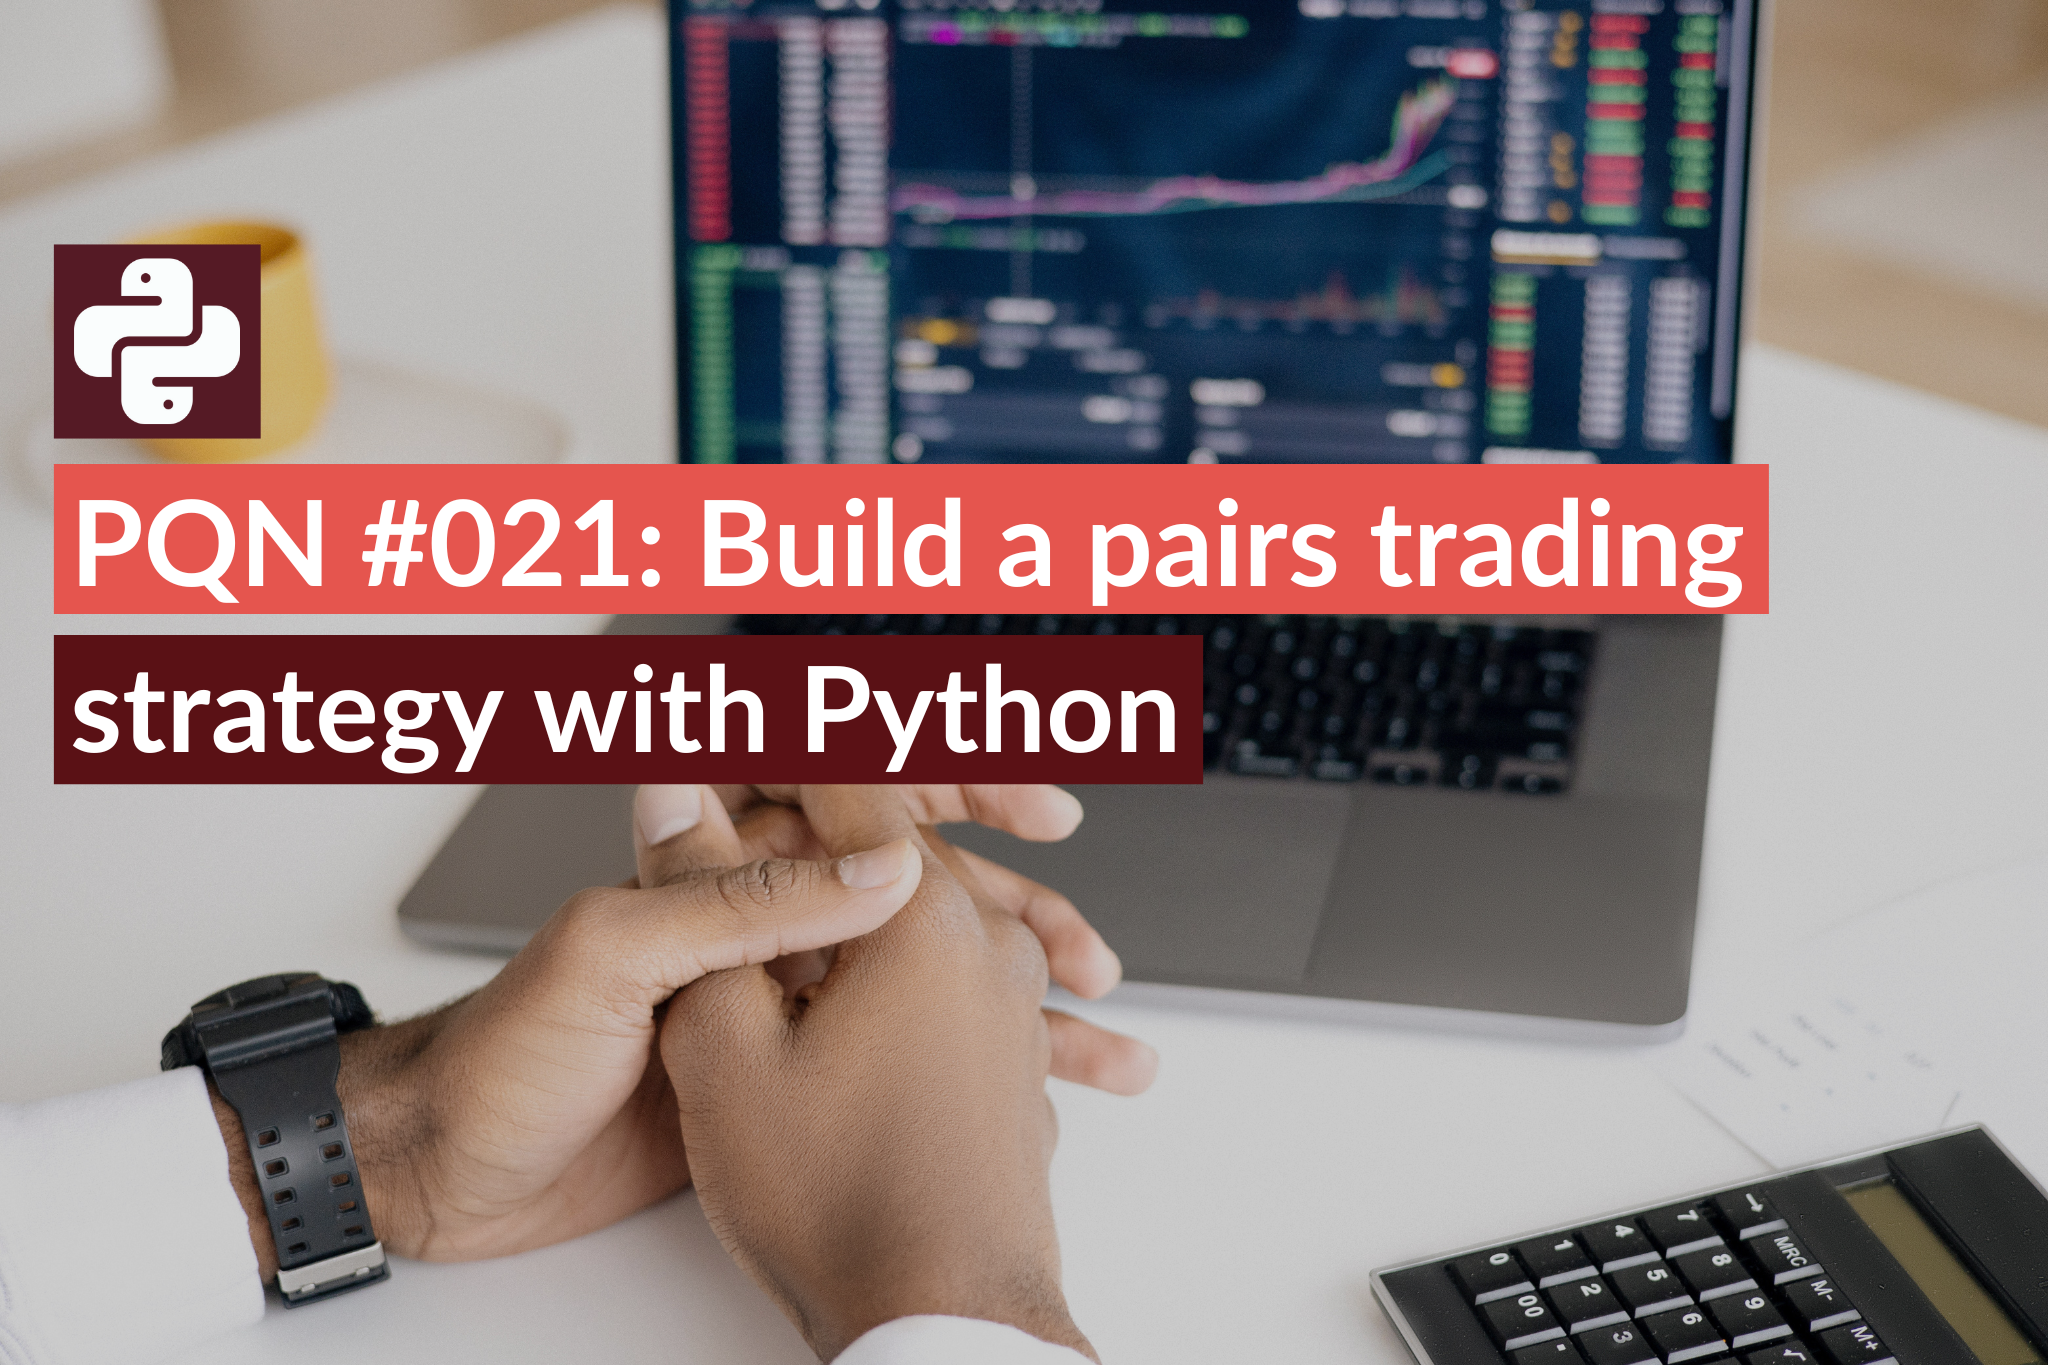 PQN #021 Build a pairs trading strategy with Python